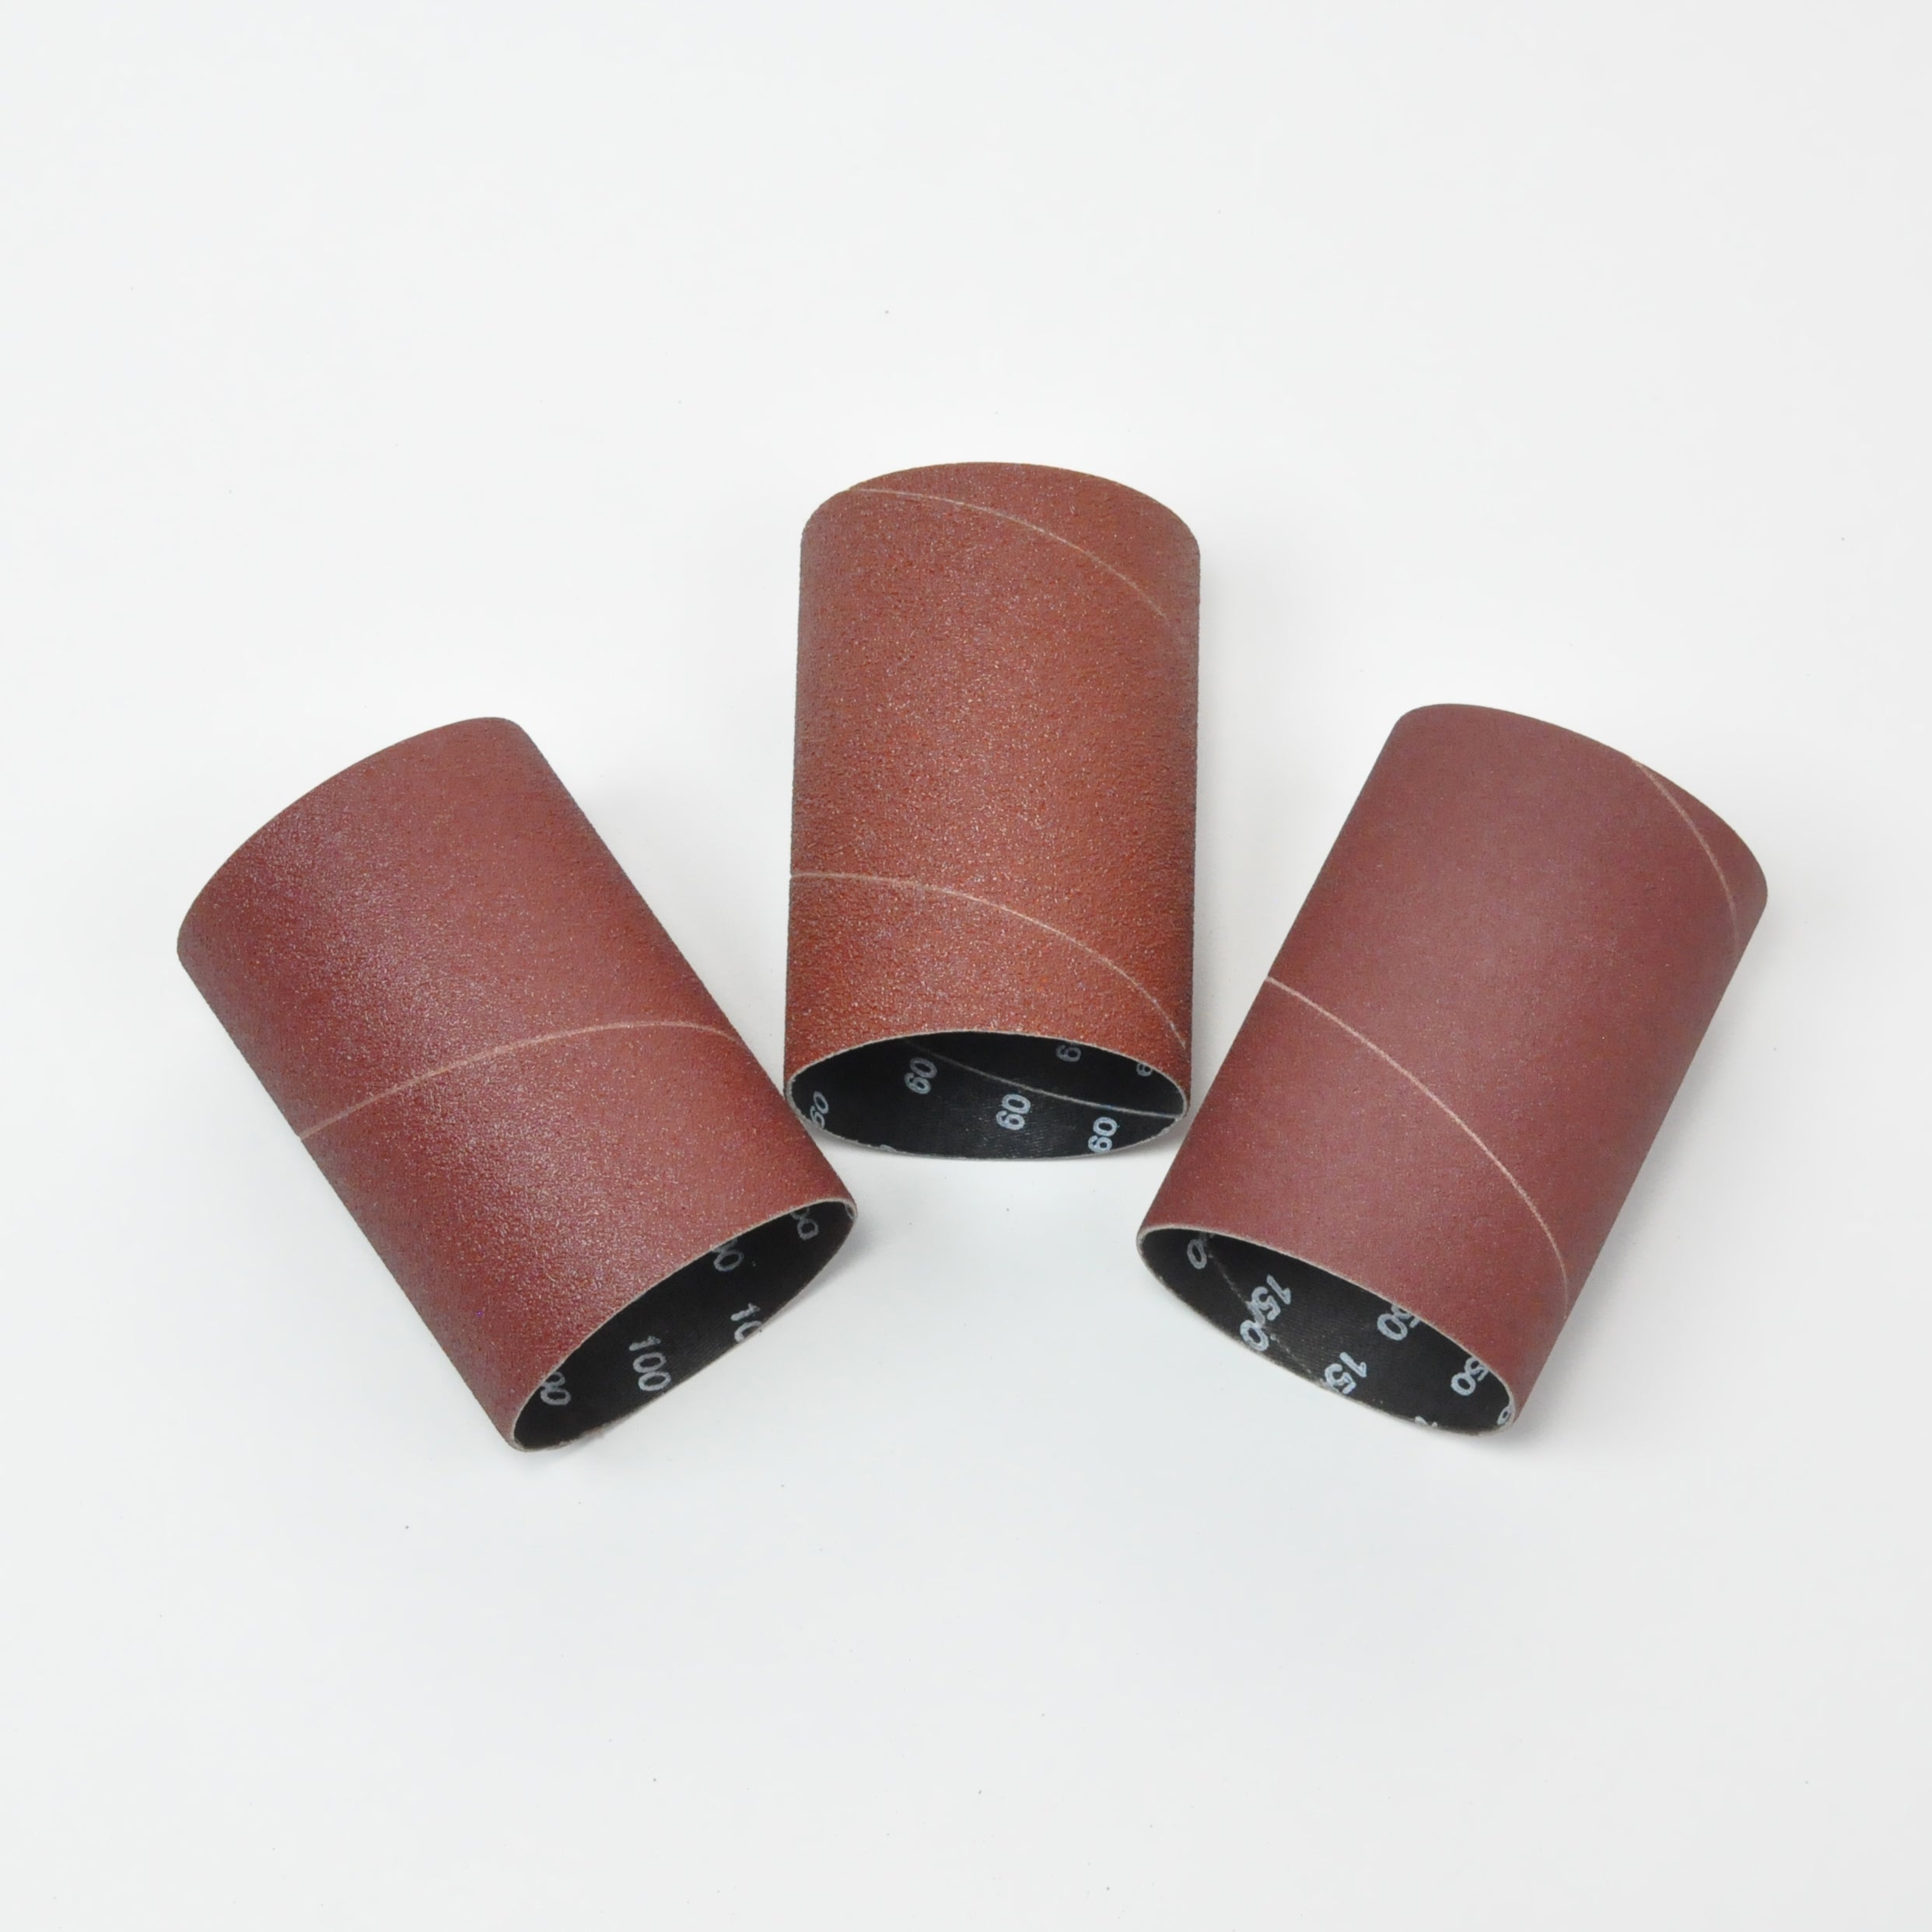 75mm (3") x 115mm (4-1/2") Assorted Grit Sanding Sleeve Pack (3Pce) 50-45303 by Rikon